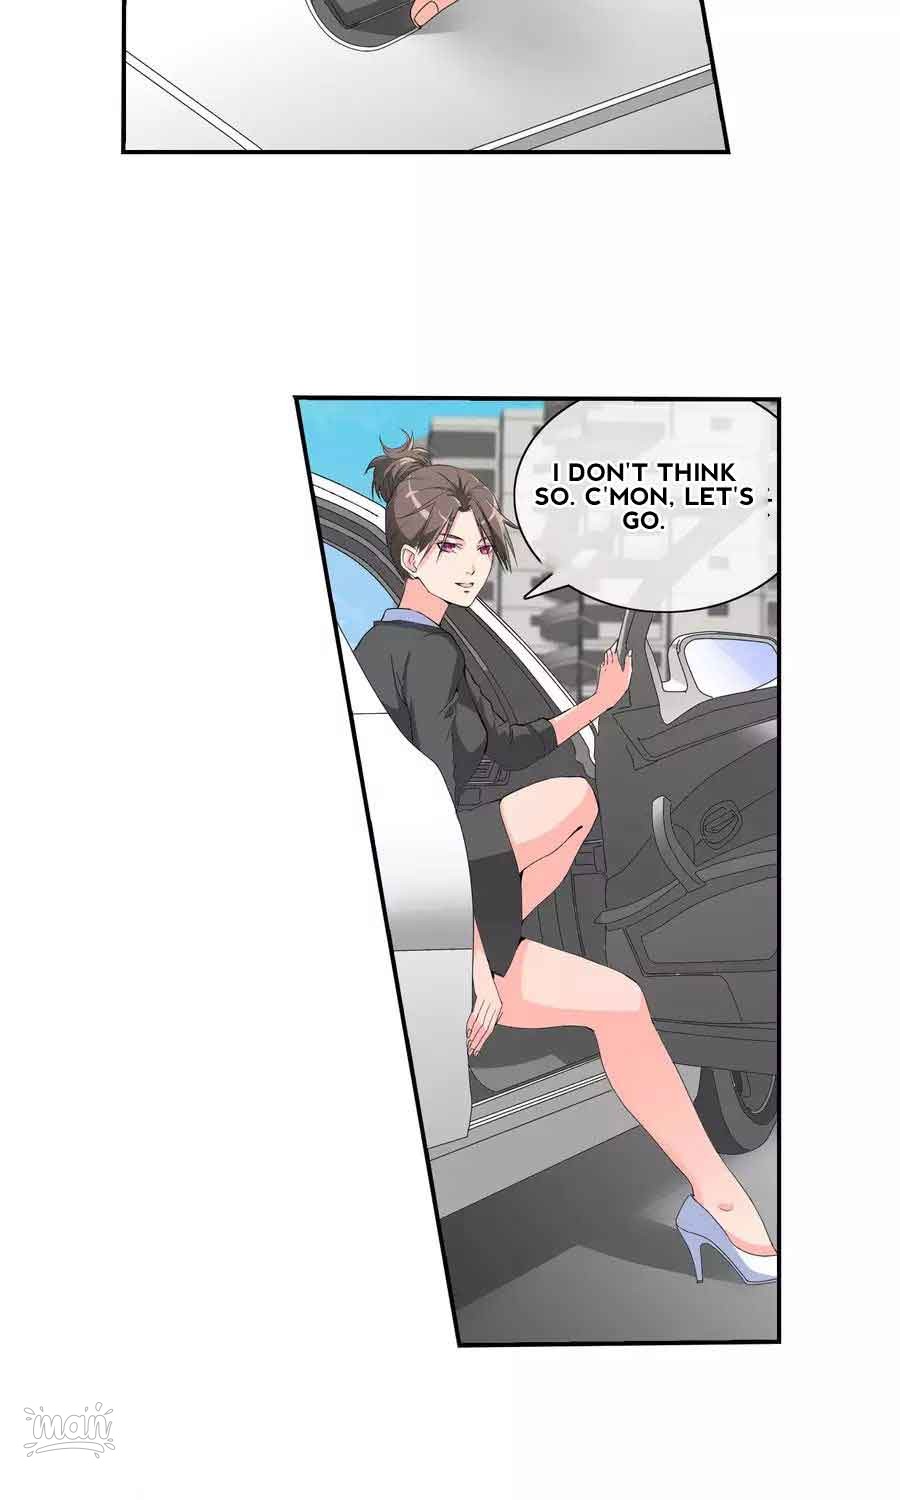 The Peerless Soldier Ch. 40 Driving Skills